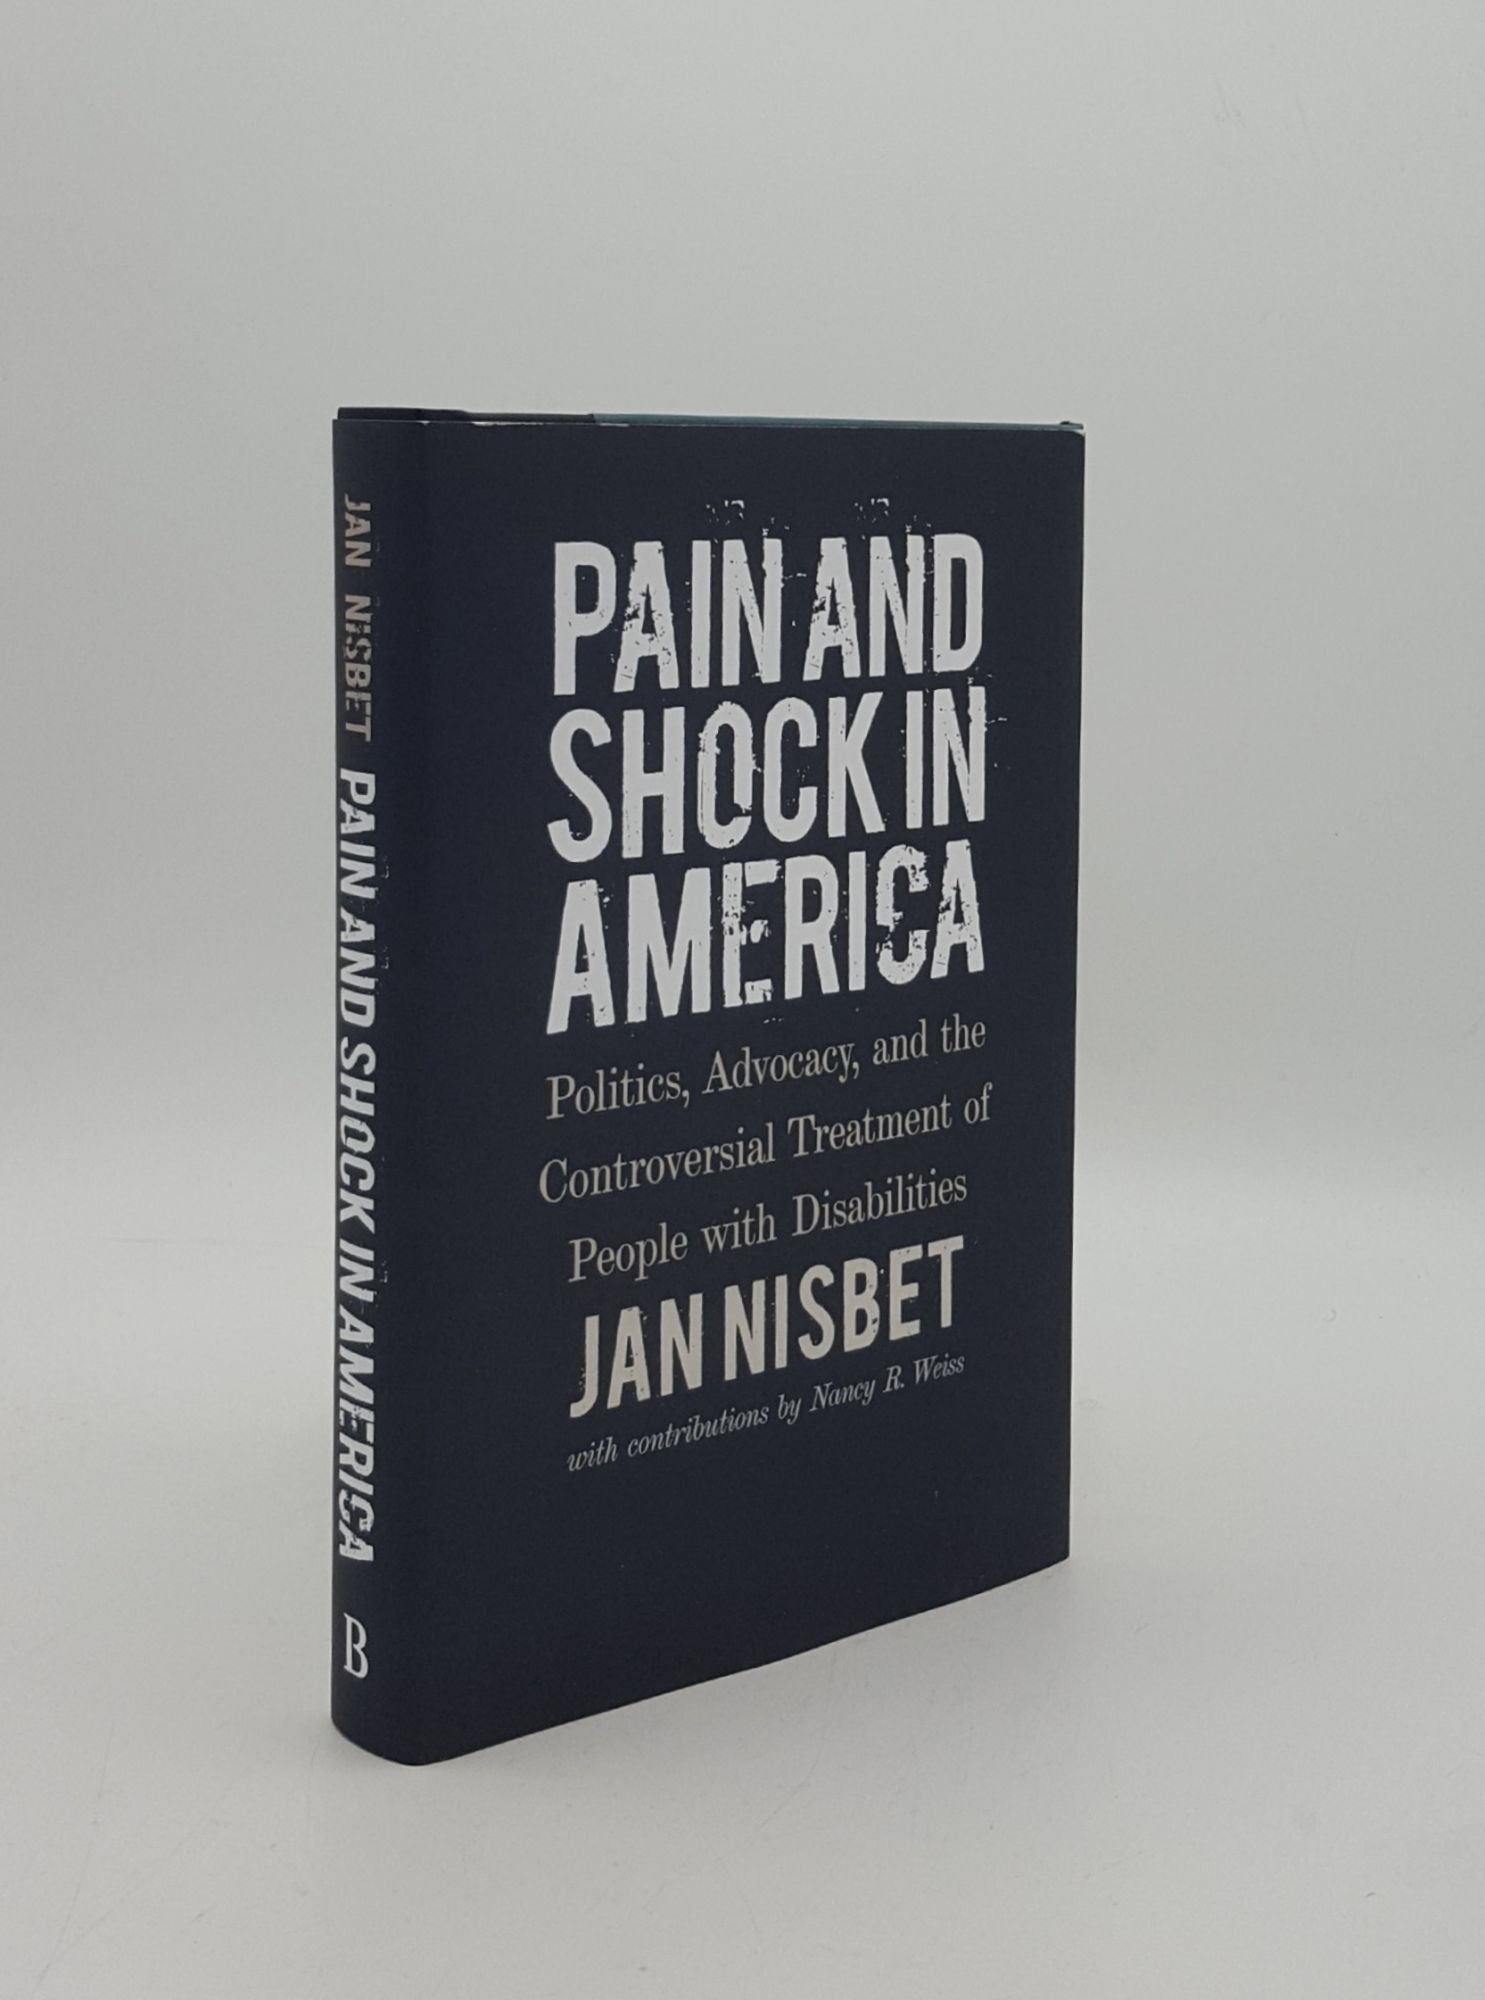 NISBET Jan, WEISS Nancy R. - Pain and Shock in America Politics Advocacy and the Controversial Treatment of People with Disabilities